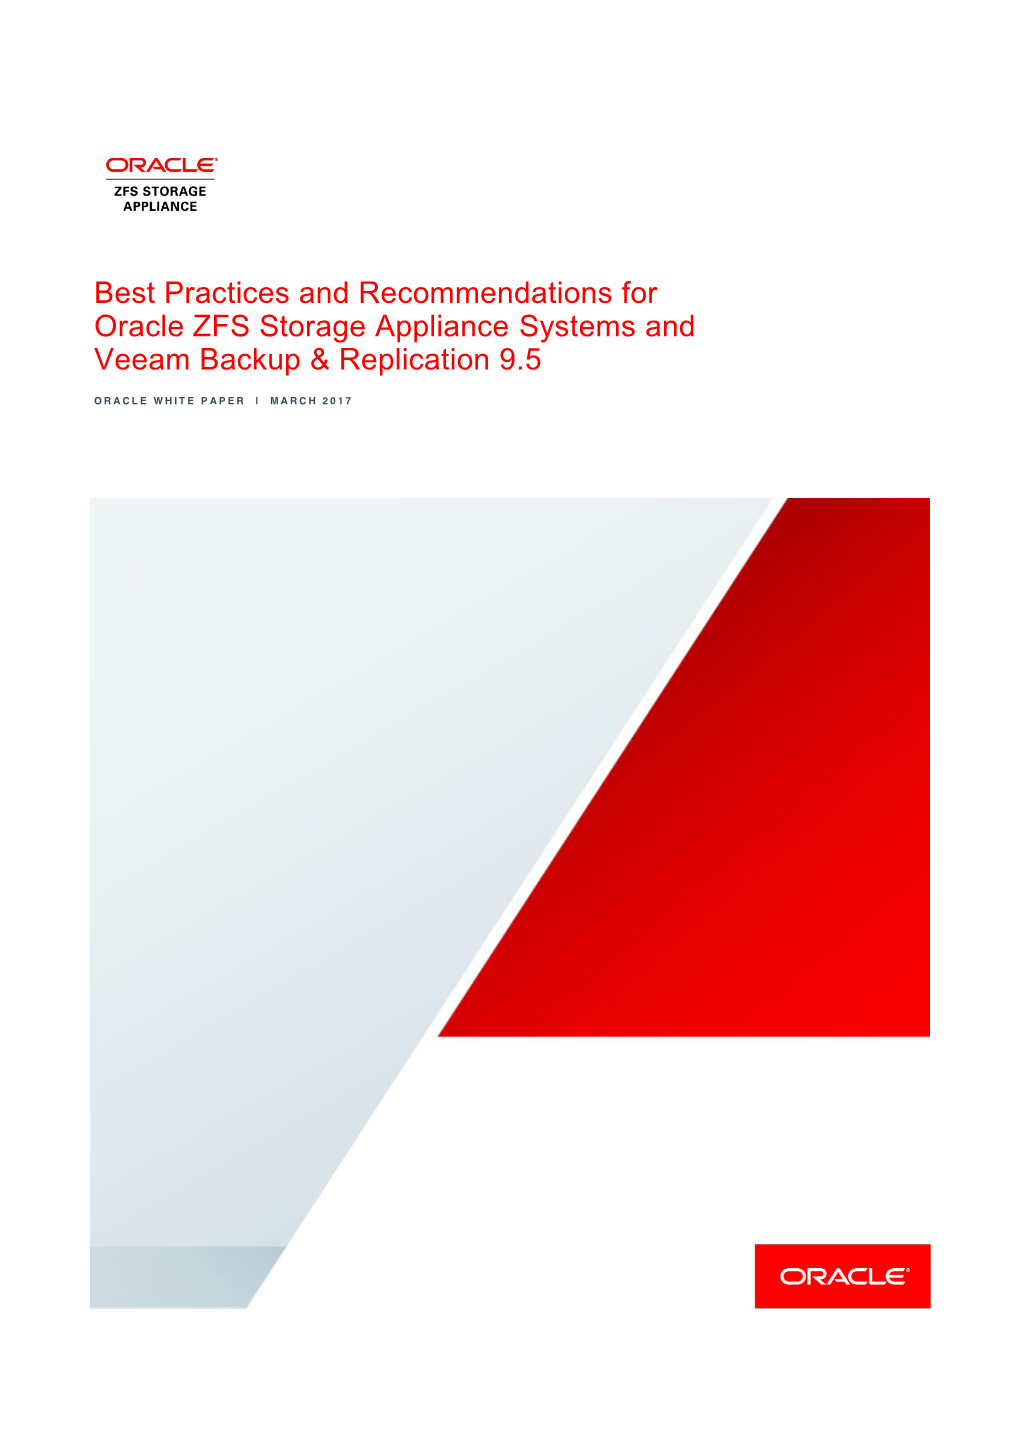 Best Practices and Recommendations for Oracle ZFS Storage Appliance Systems and Veeam Backup & Replication 9.5